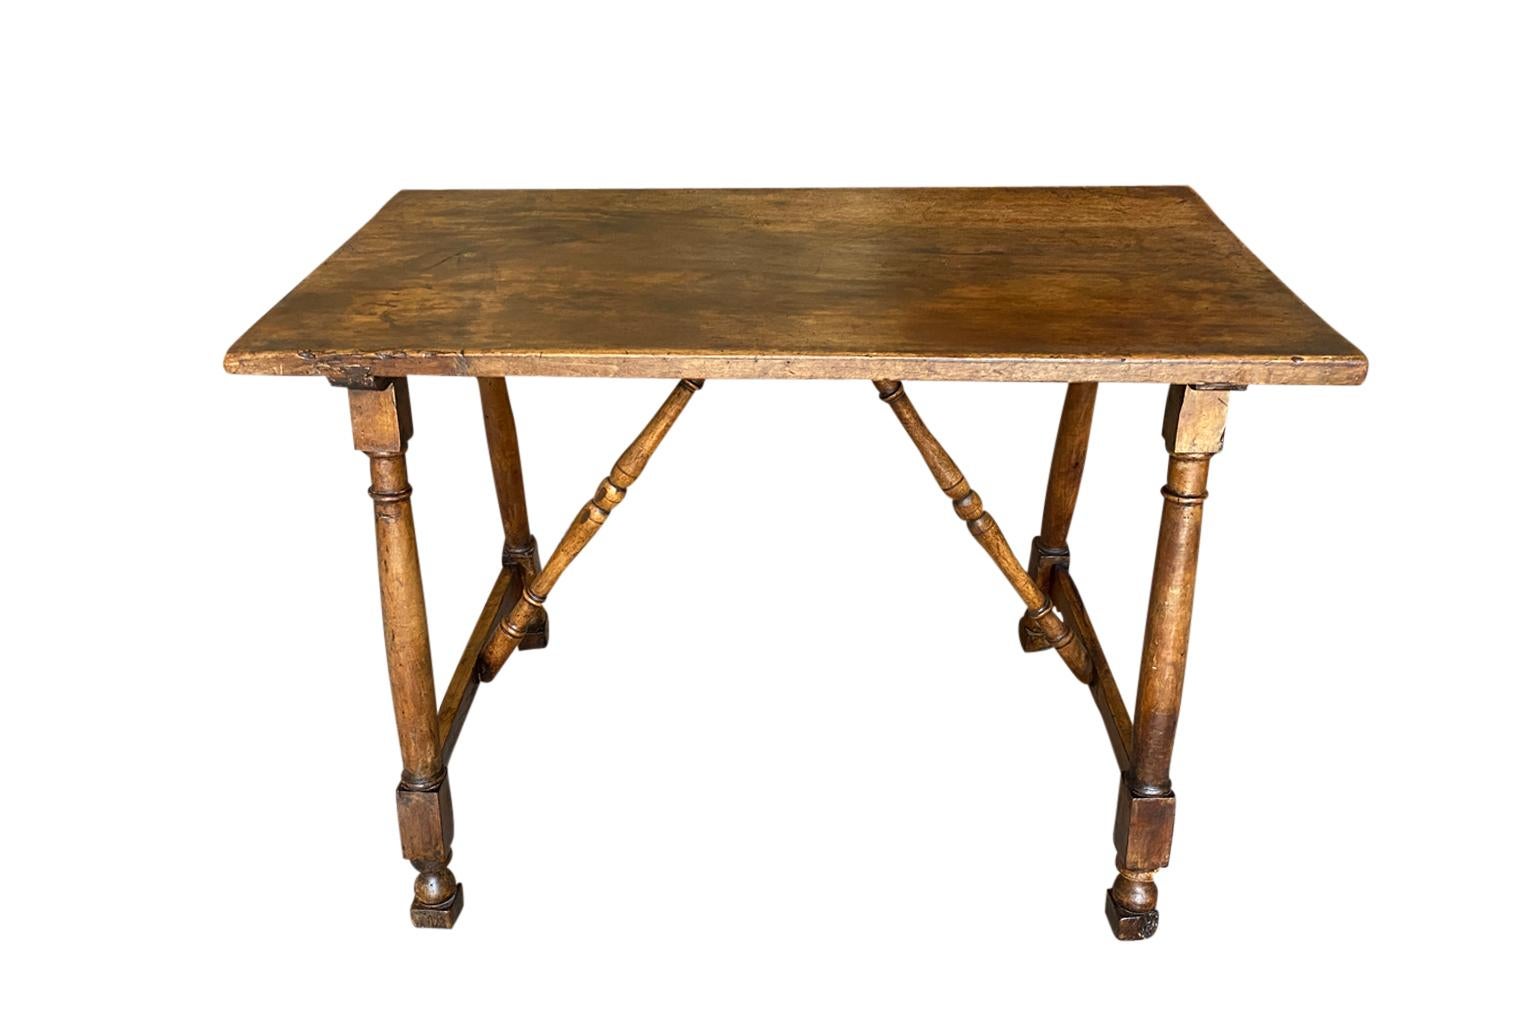 A stunning 18th century side table - console from the Tuscan region of Italy. Beautifully constructed from beautiful walnut with wonderful turned legs and stretchers. Fabulous patina - warm and luminous. Perfect as a writing table.